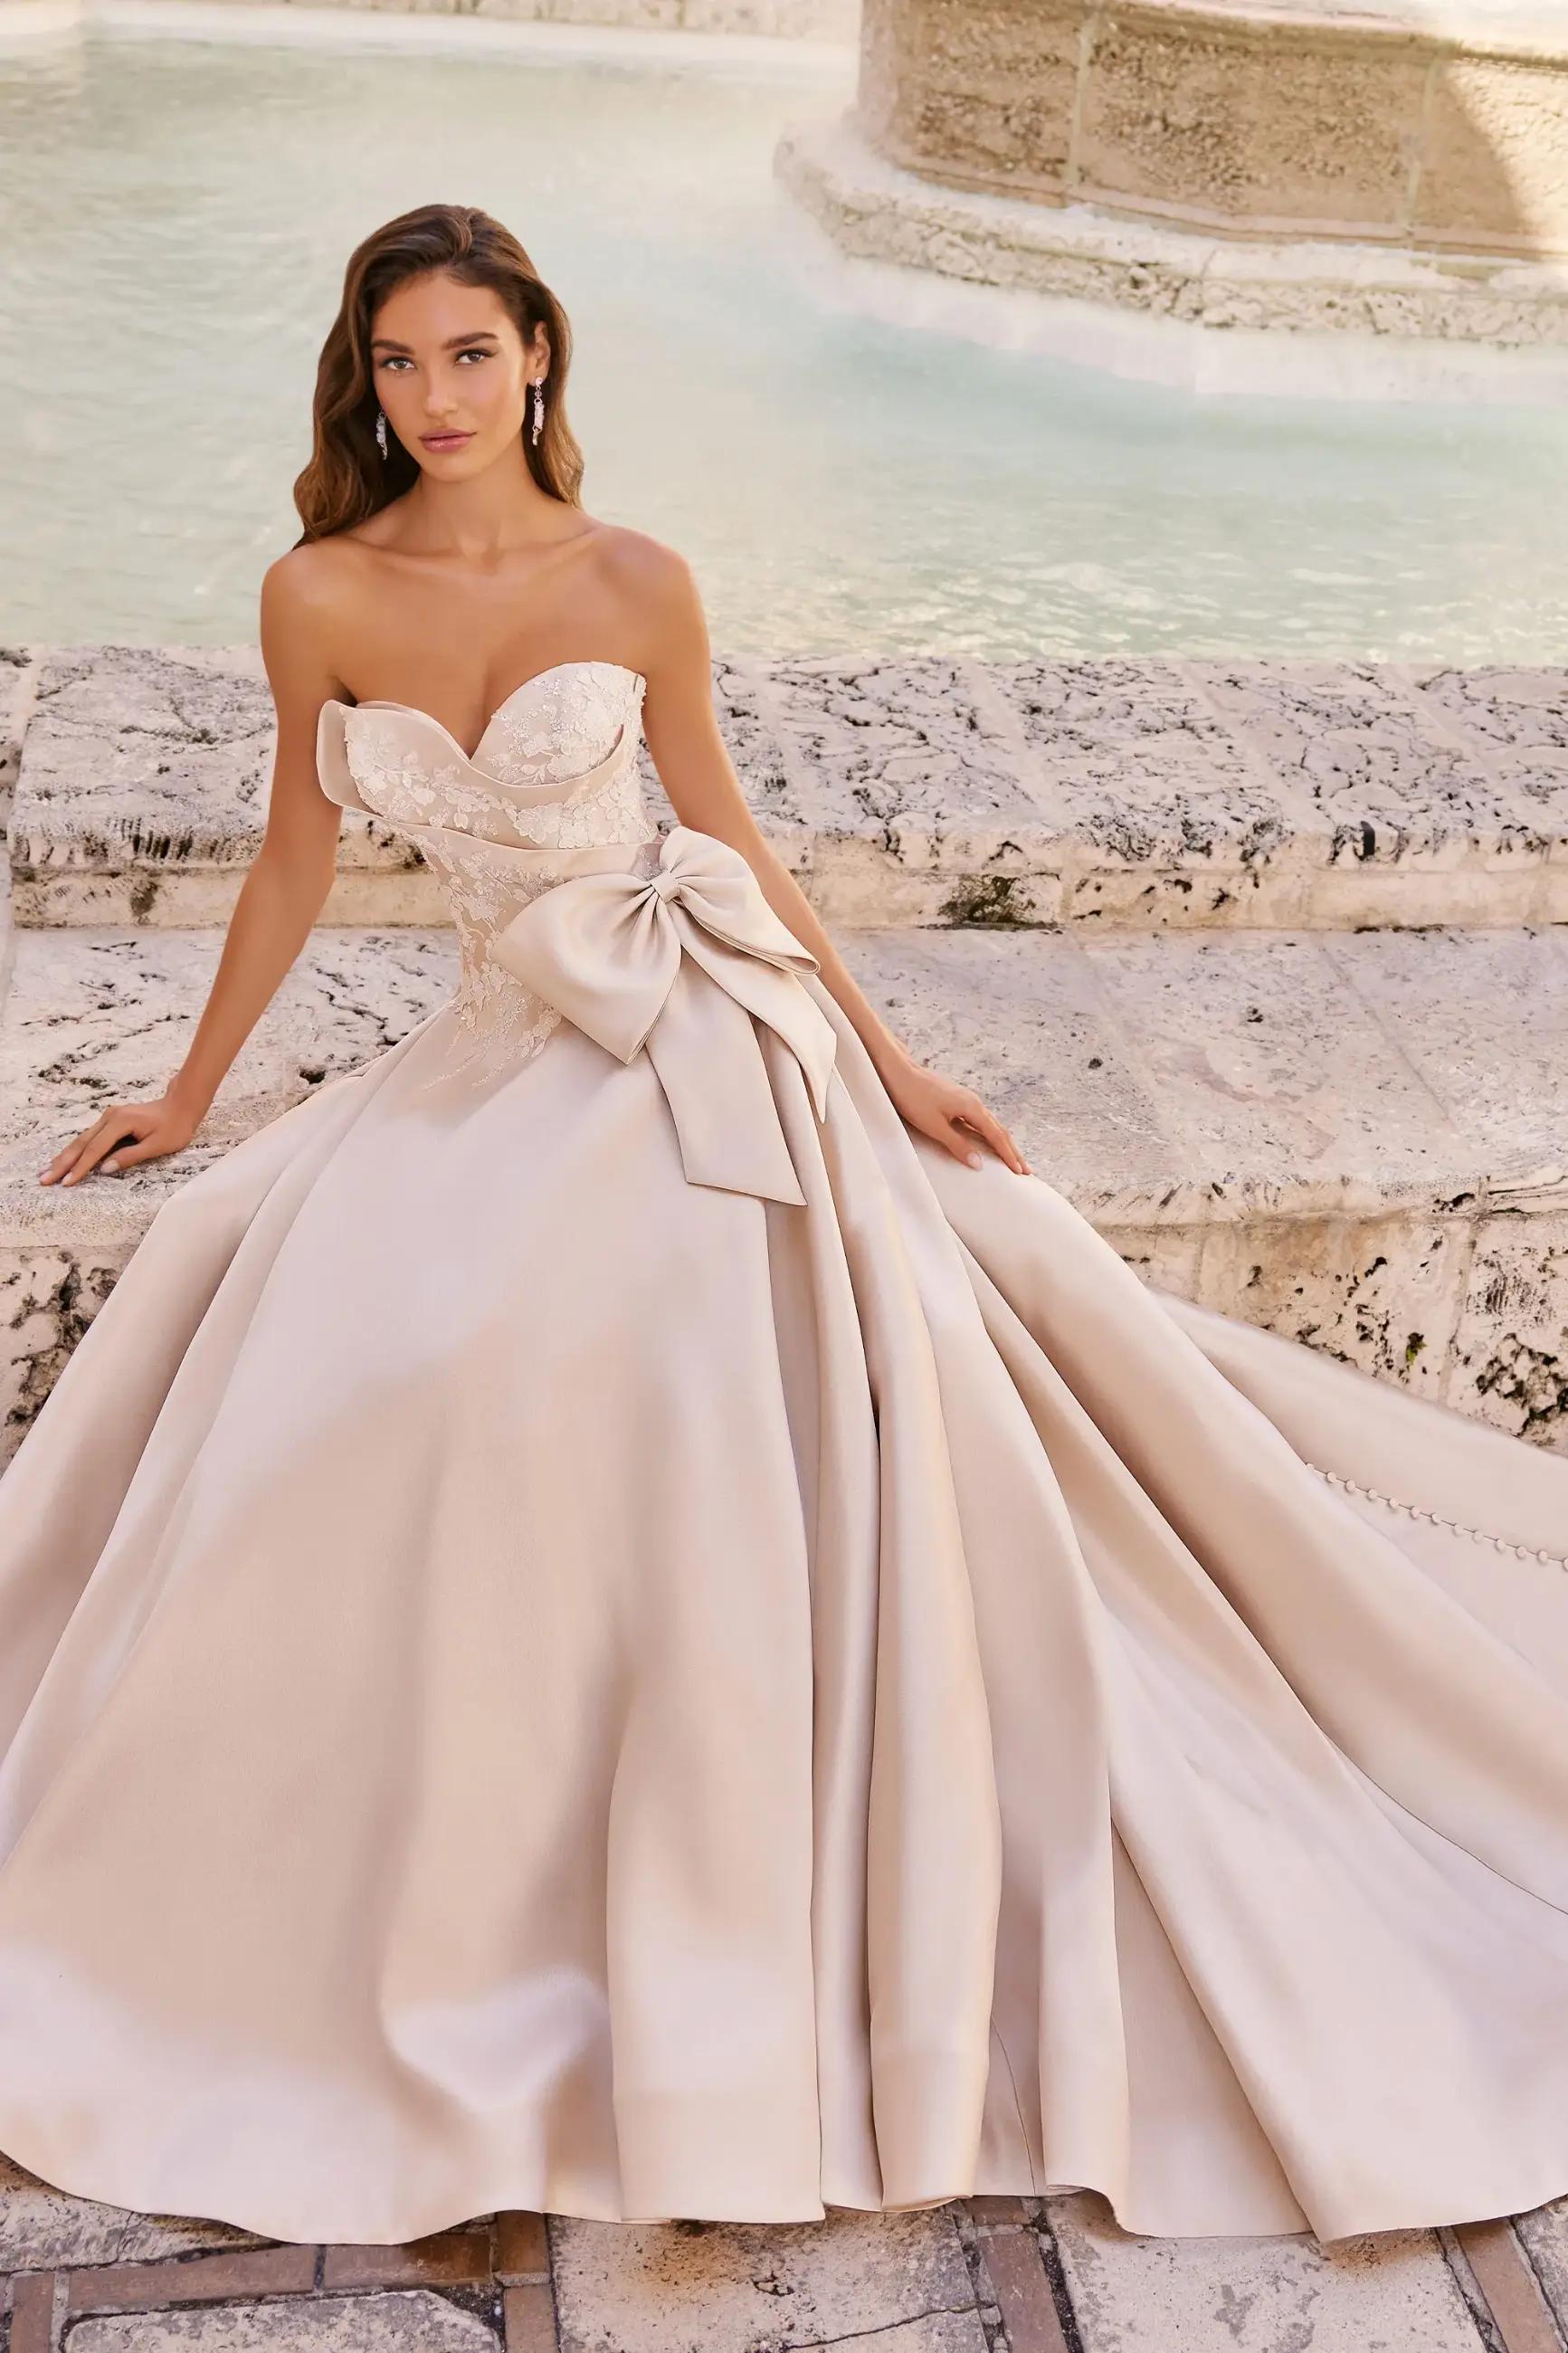 Elegance Redefined: A Closer Look at Lace Bridal&#39;s Sophisticated Collection Image